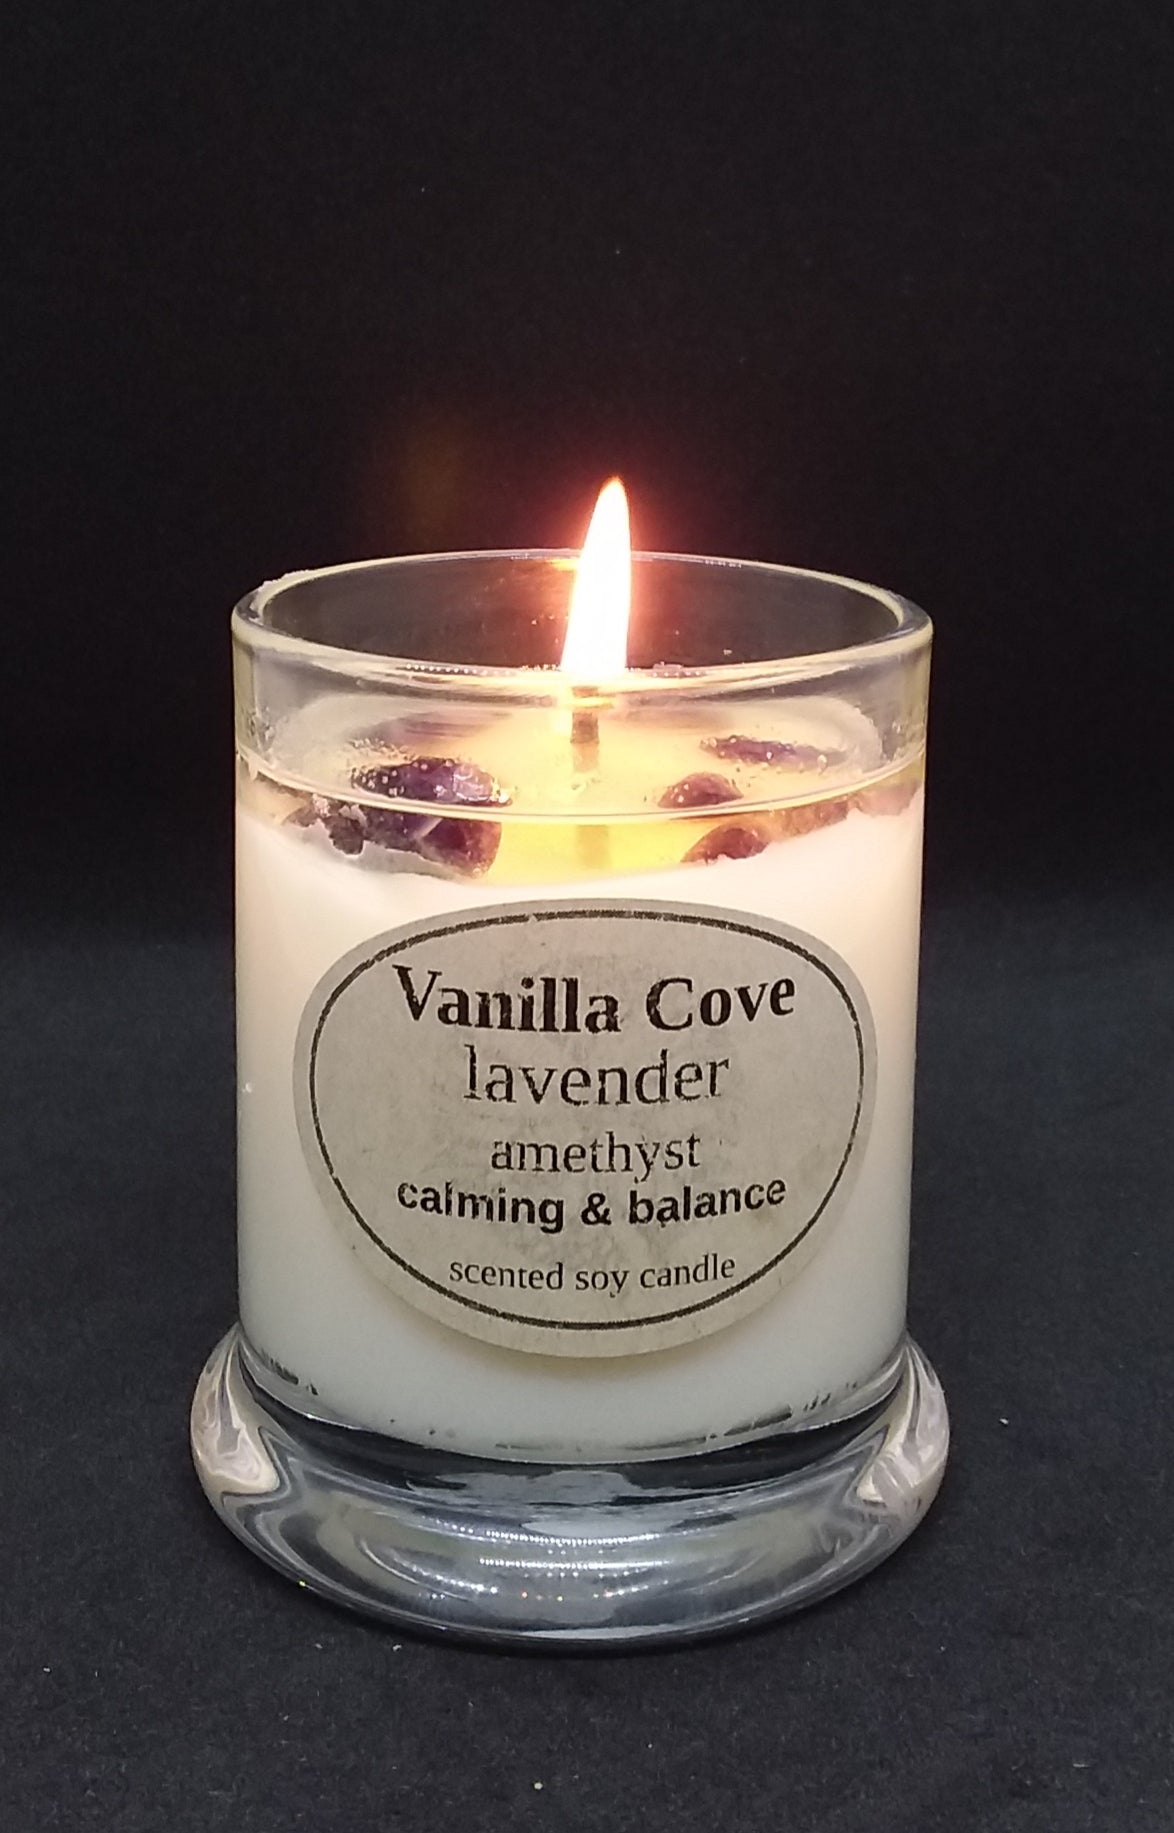 Vanilla Cove Soy Candle 45 hour lavender fragrance with amethyst crystals in clear glass jar and glass lid photo has candle lit